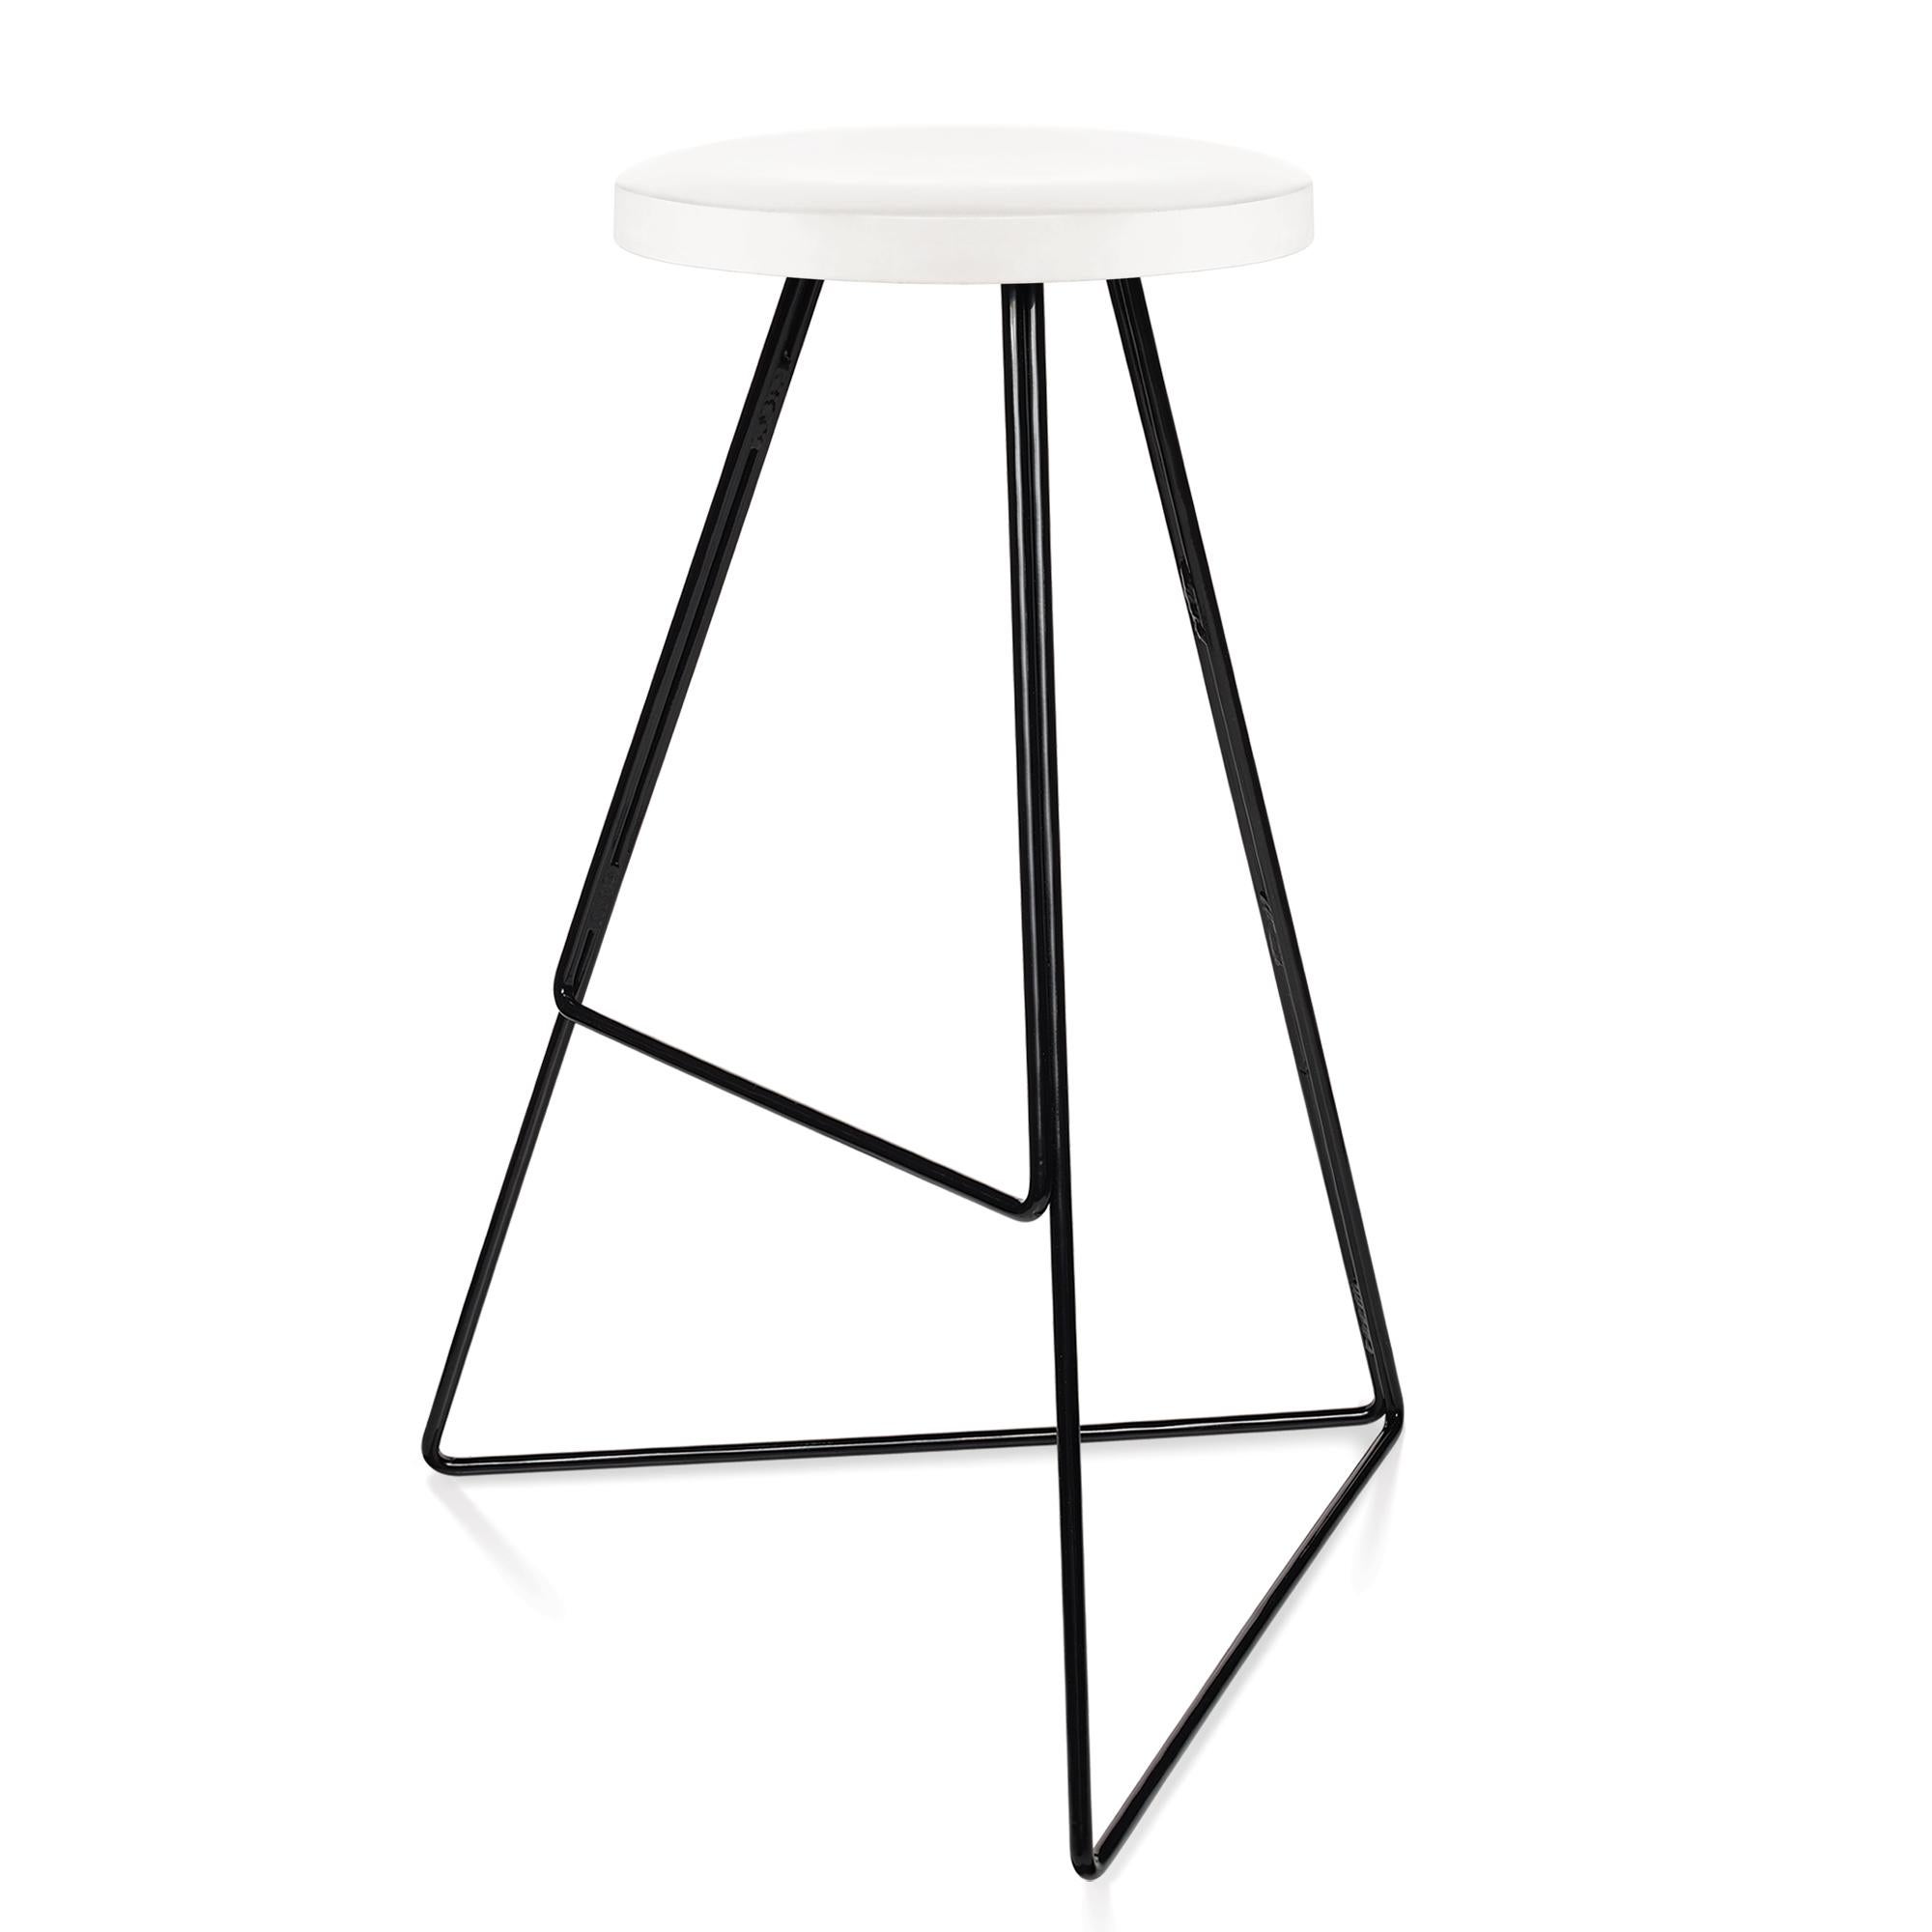 Powder-Coated The Coleman Stool, Black and White, Counter Height For Sale